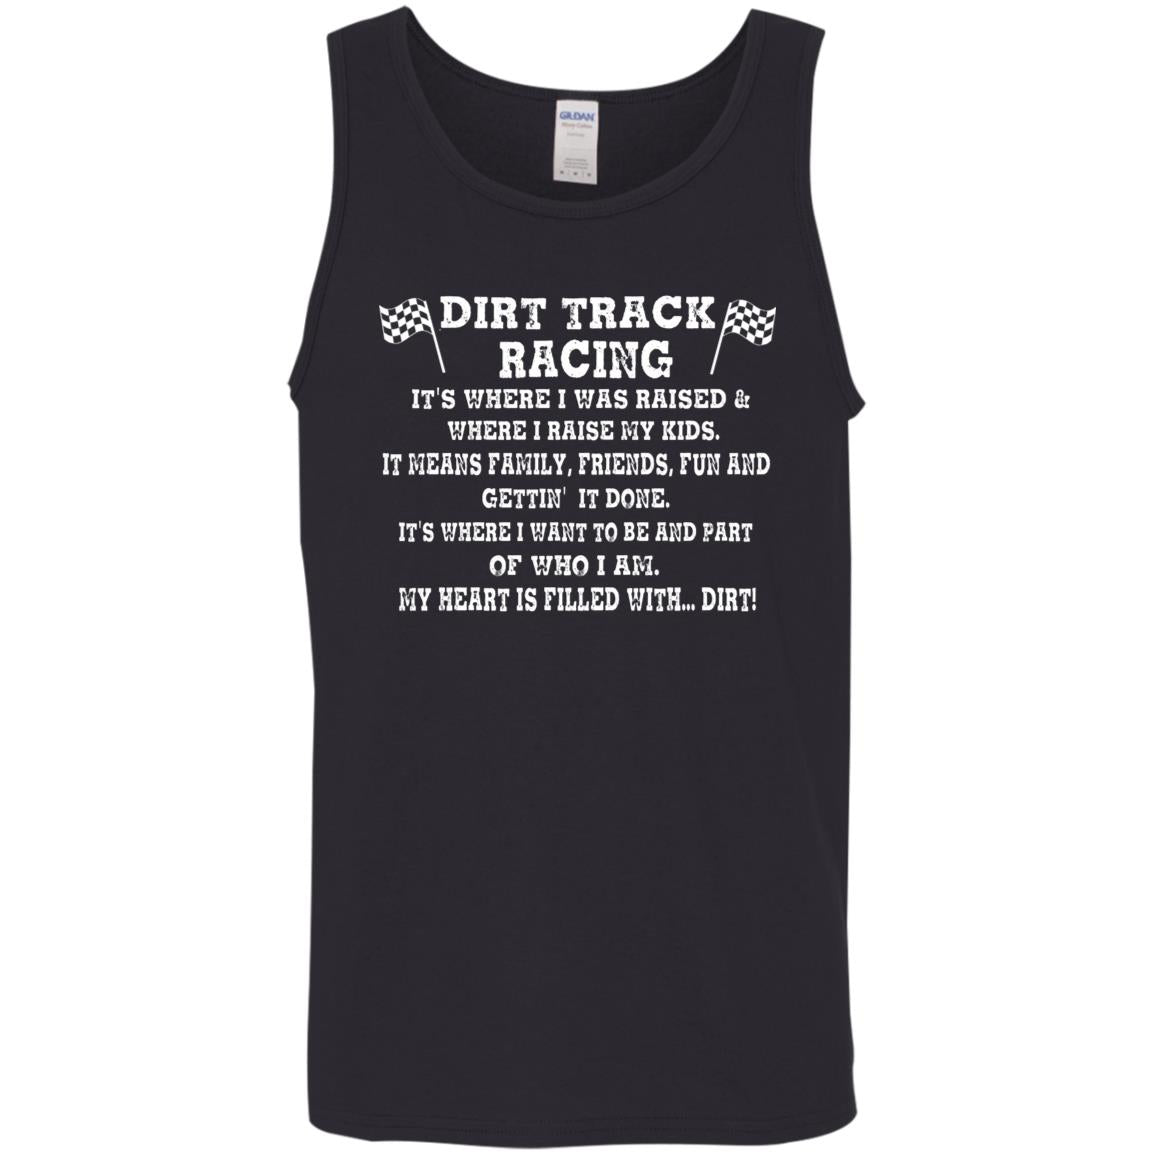 Dirt Track Racing It's Where I Was Raised Cotton Tank Top 5.3 oz.